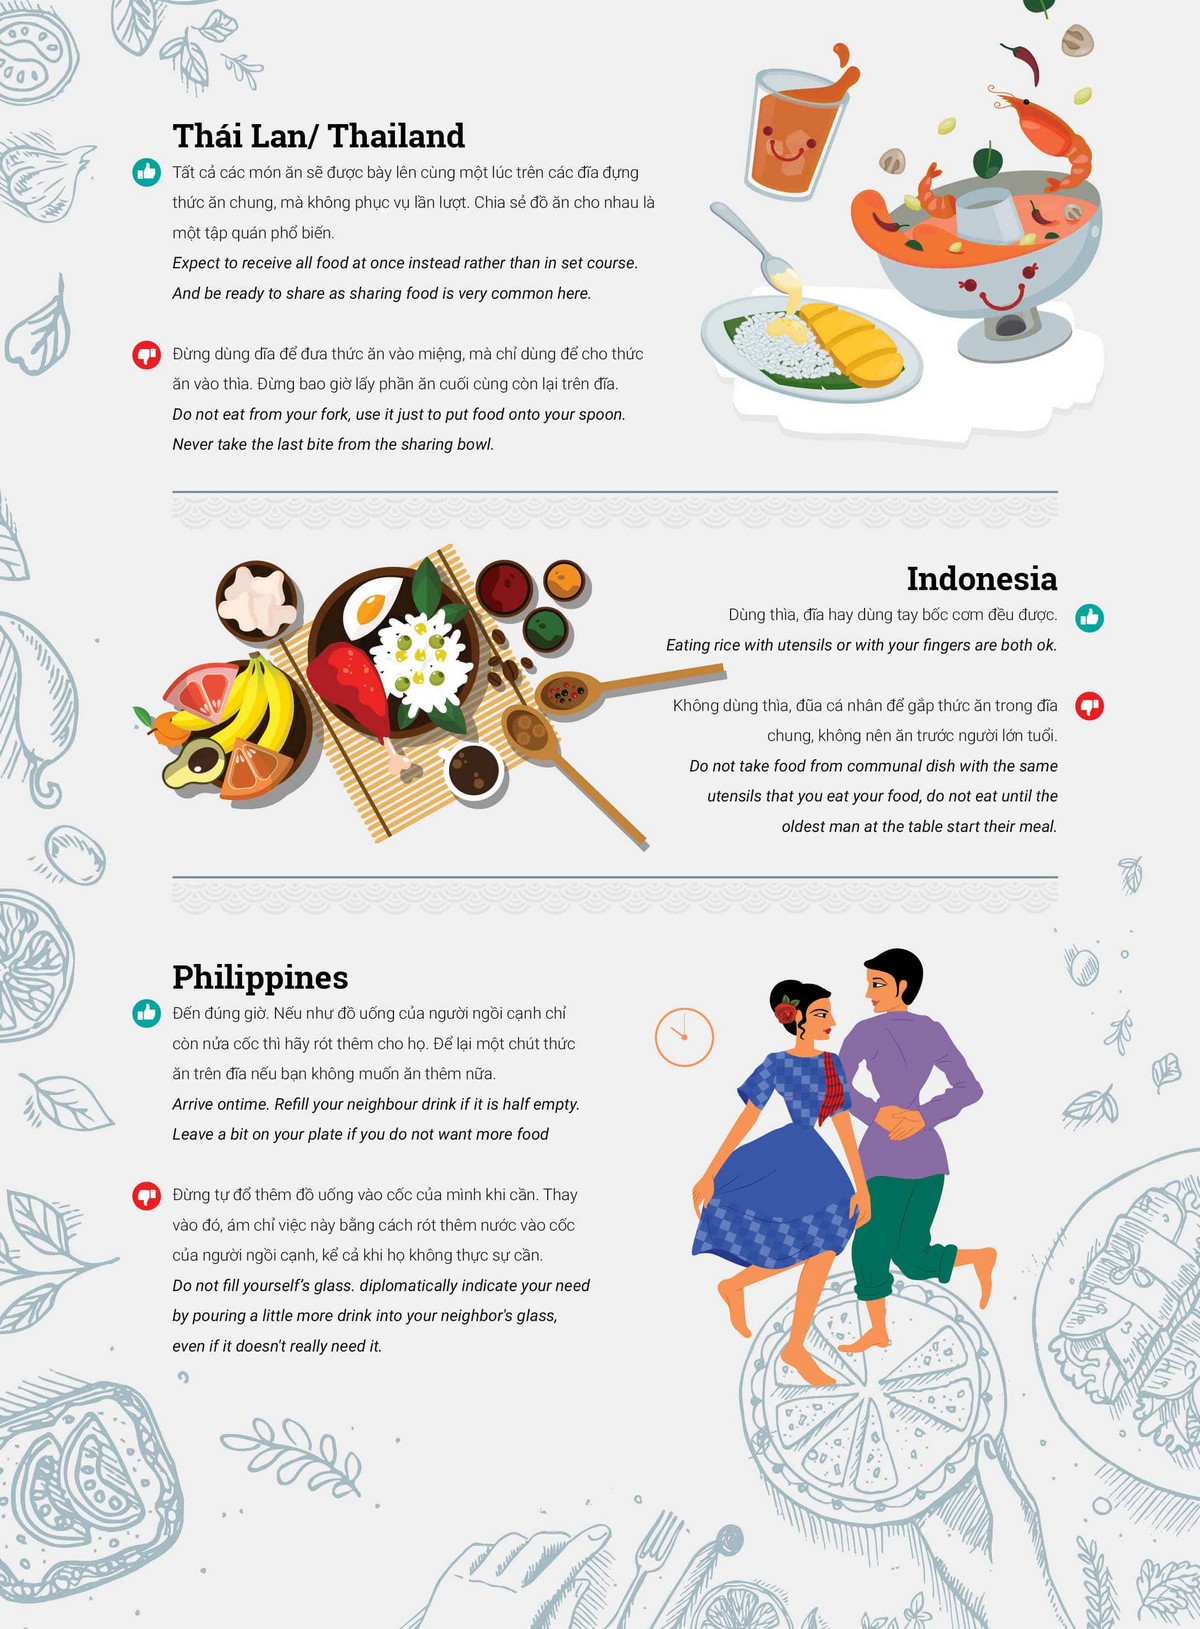 Wanderlust Tips Magazine | Dining etiquette in different countries